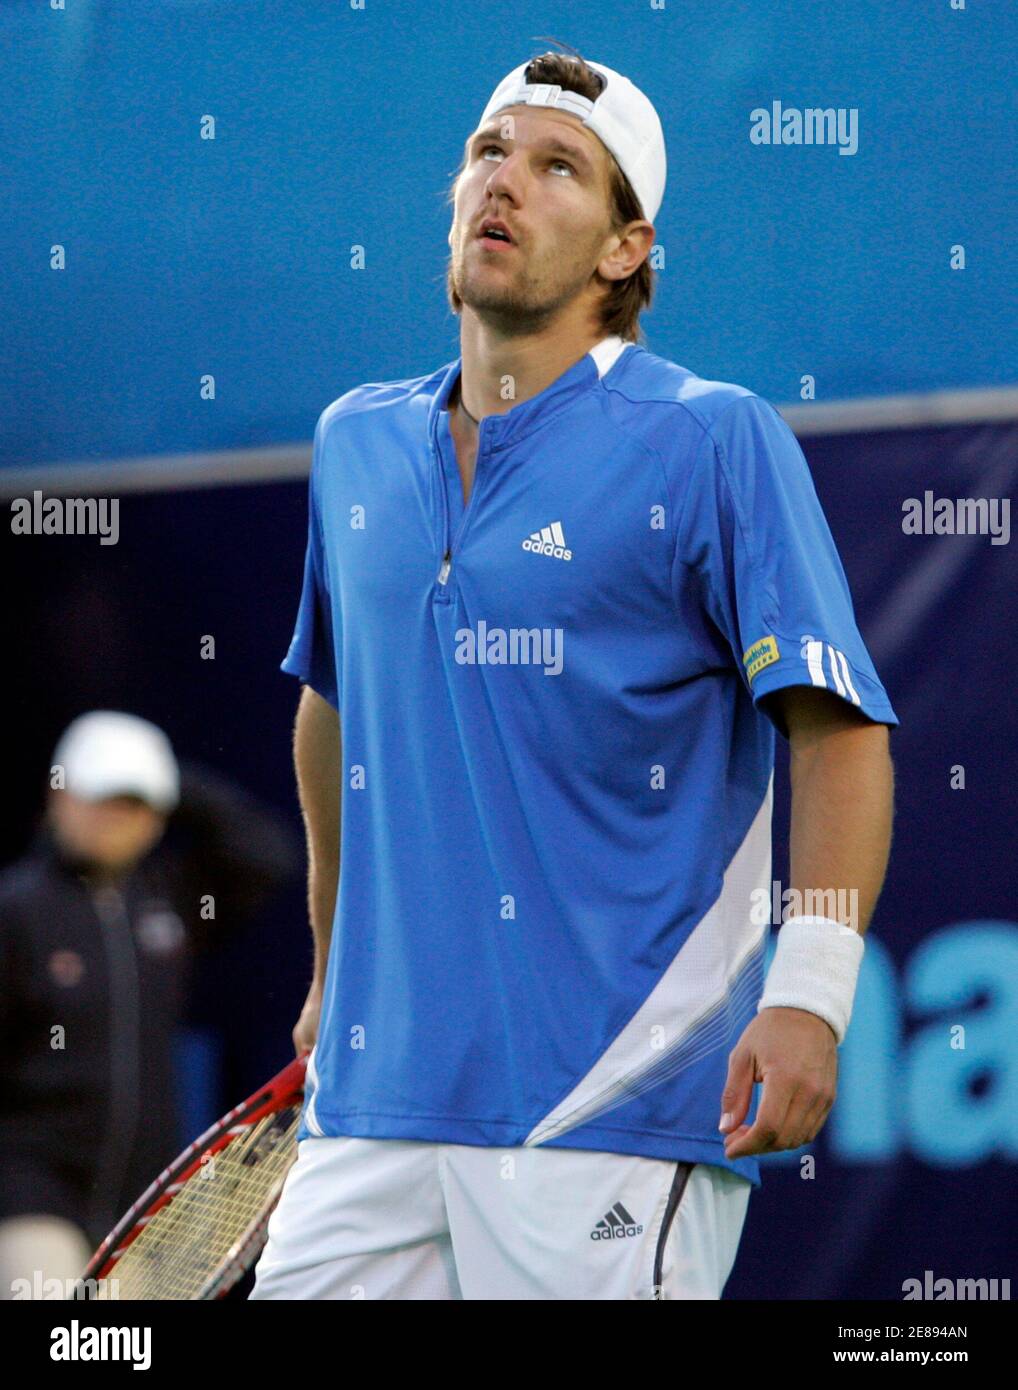 Jurgen Melzer of Austria reacts after missing a shot against Lleyton Hewitt of Australia during the finals of the Las Vegas Open tennis tournament in Las Vegas March 4, 2007. REUTERS/Steve Marcus (UNITED STATES) Stock Photo